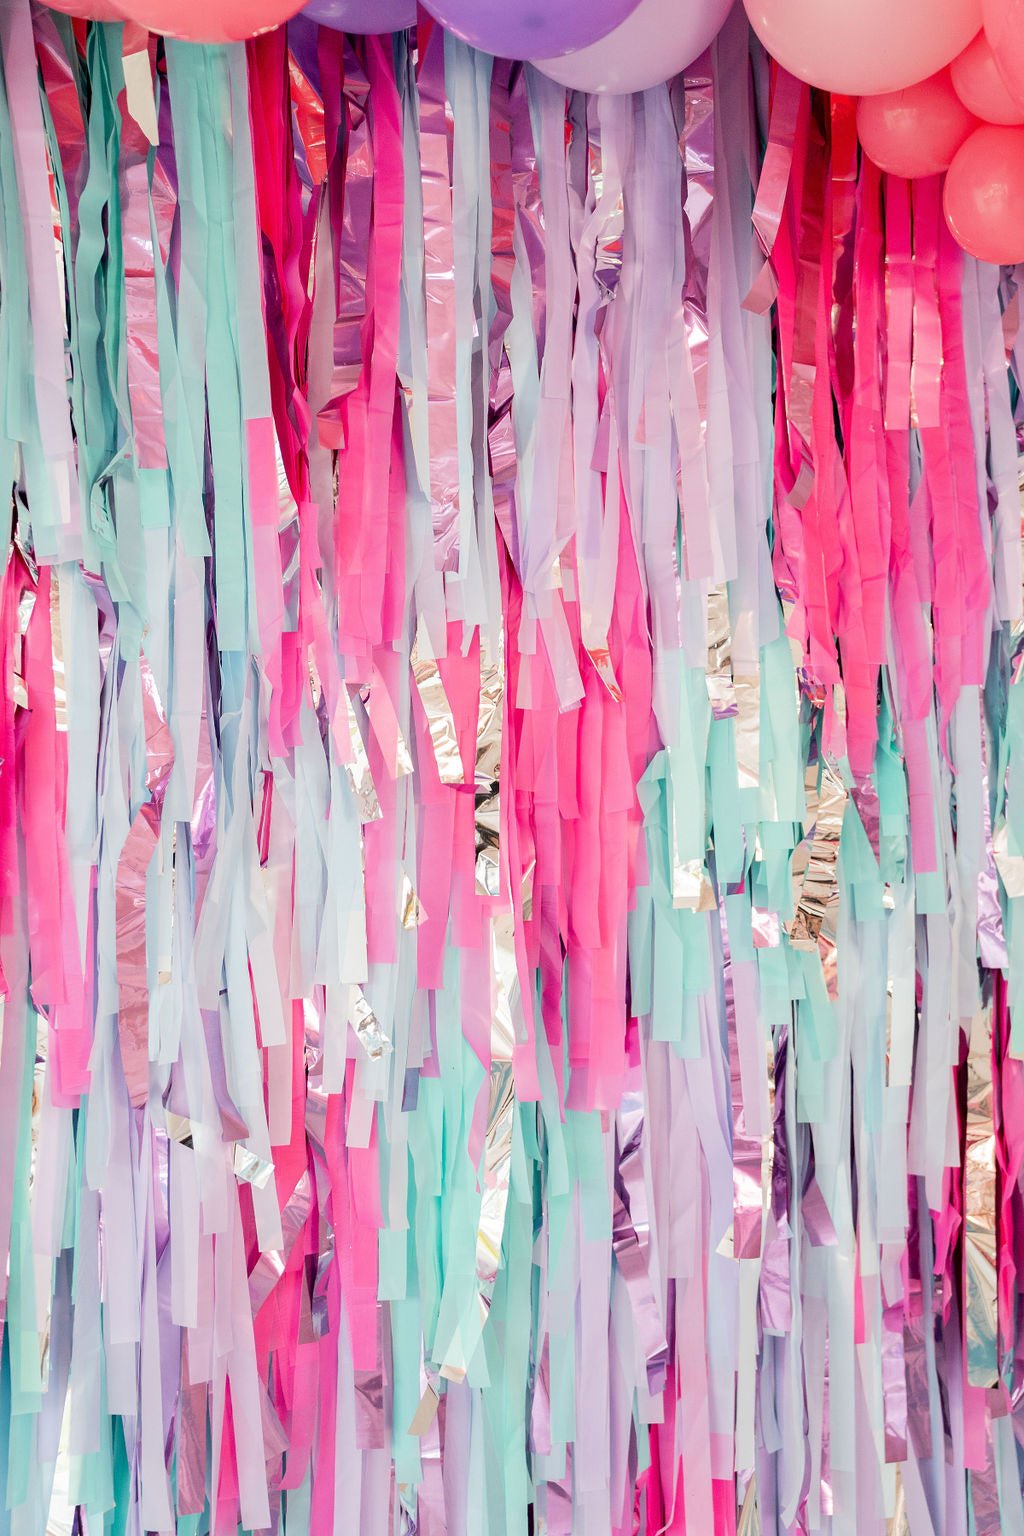 Interstellar Fringe Backdrop - Oh My Darling Party Co-backdrops for partyBirthday Partybridal party #Fringe_Backdrop#